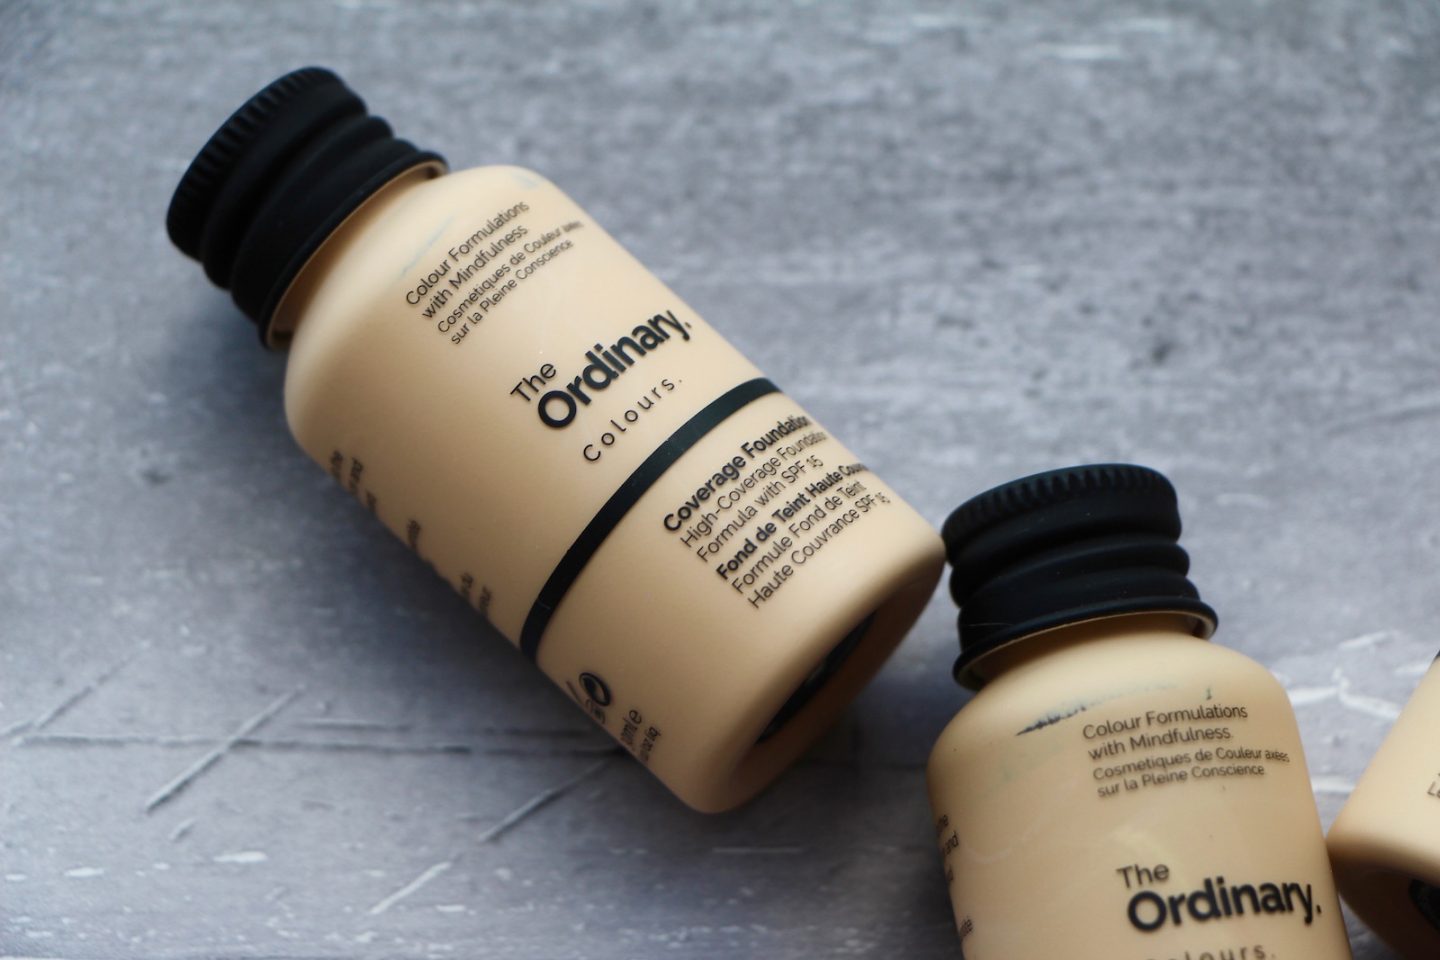 The Ordinary Colours: Serum and Coverage Foundation Review